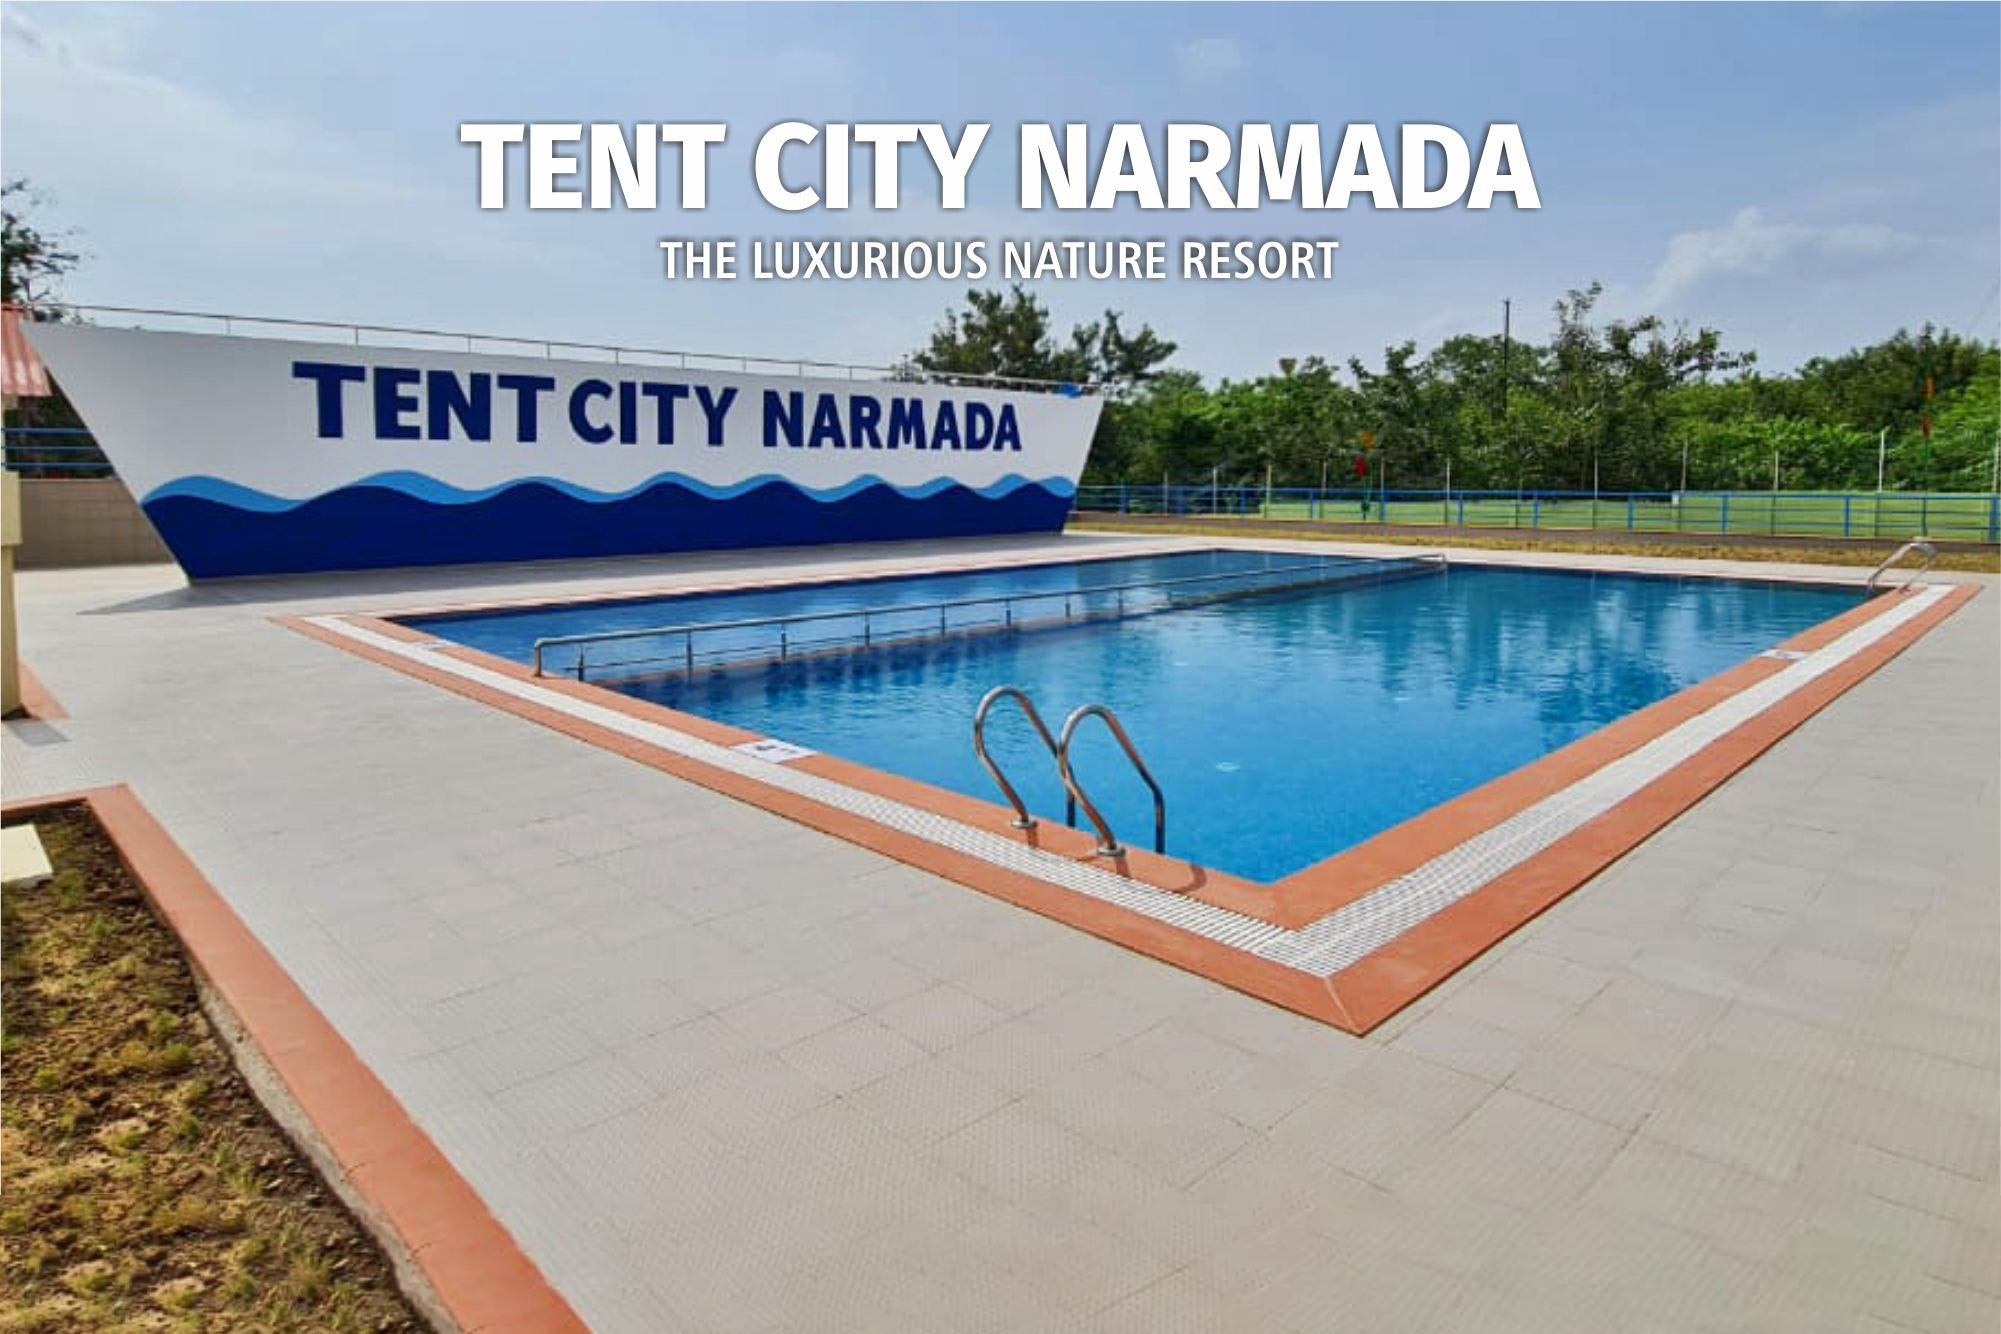 <span  class="uc_style_uc_tiles_grid_image_elementor_uc_items_attribute_title" style="color:#ffffff;">Tent City Narmada Luxurious Resort Night Swimming Pool</span>